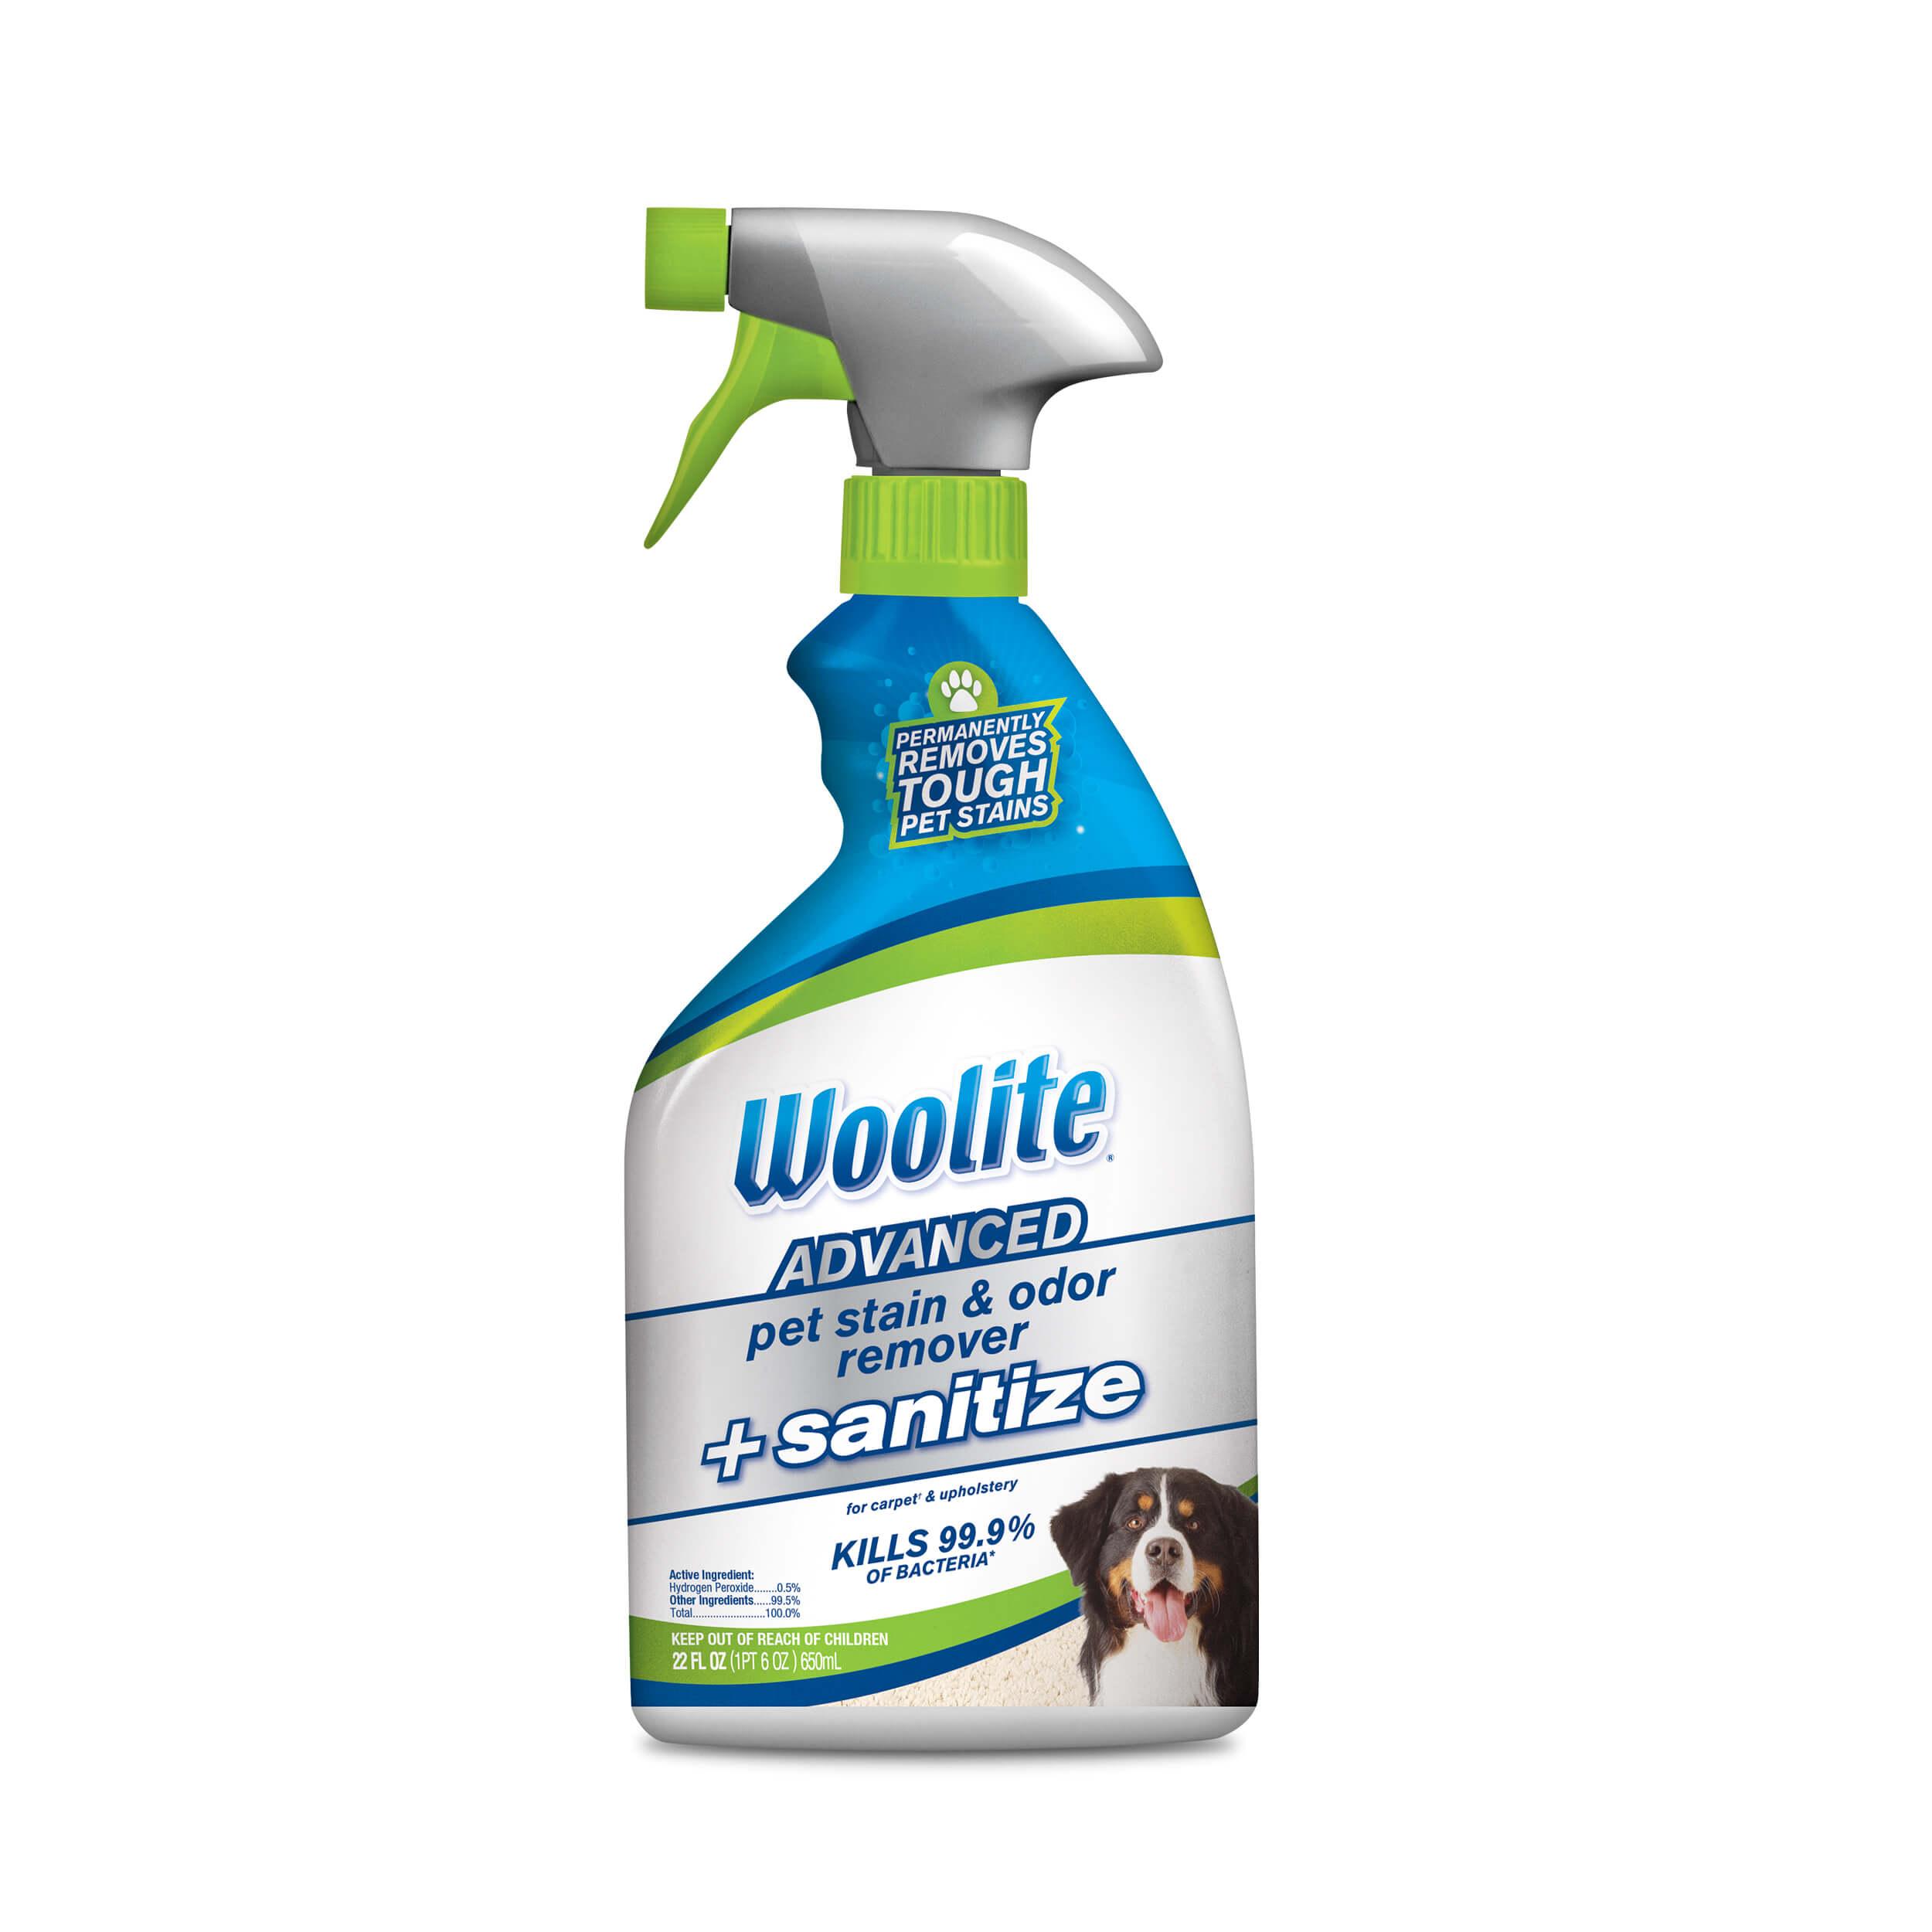 Woolite Advanced Pet Stain Odor Remover Sanitize Spray